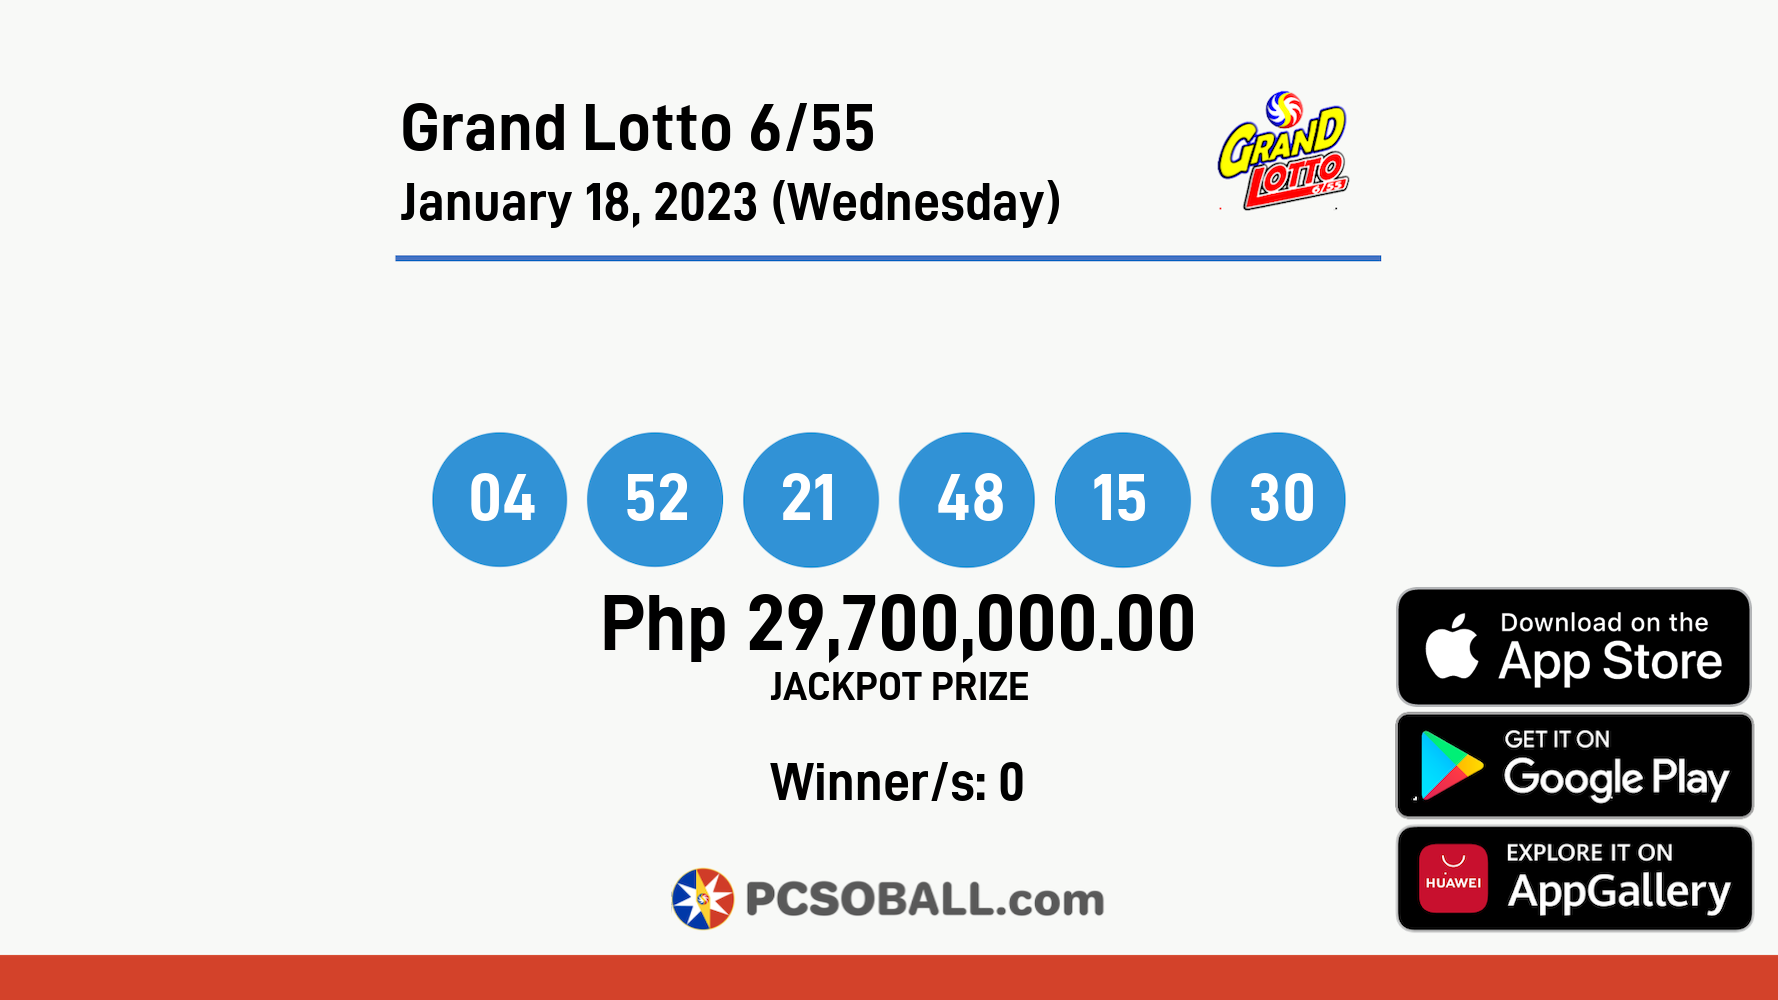 Grand Lotto 6/55 January 18, 2023 (Wednesday) Result